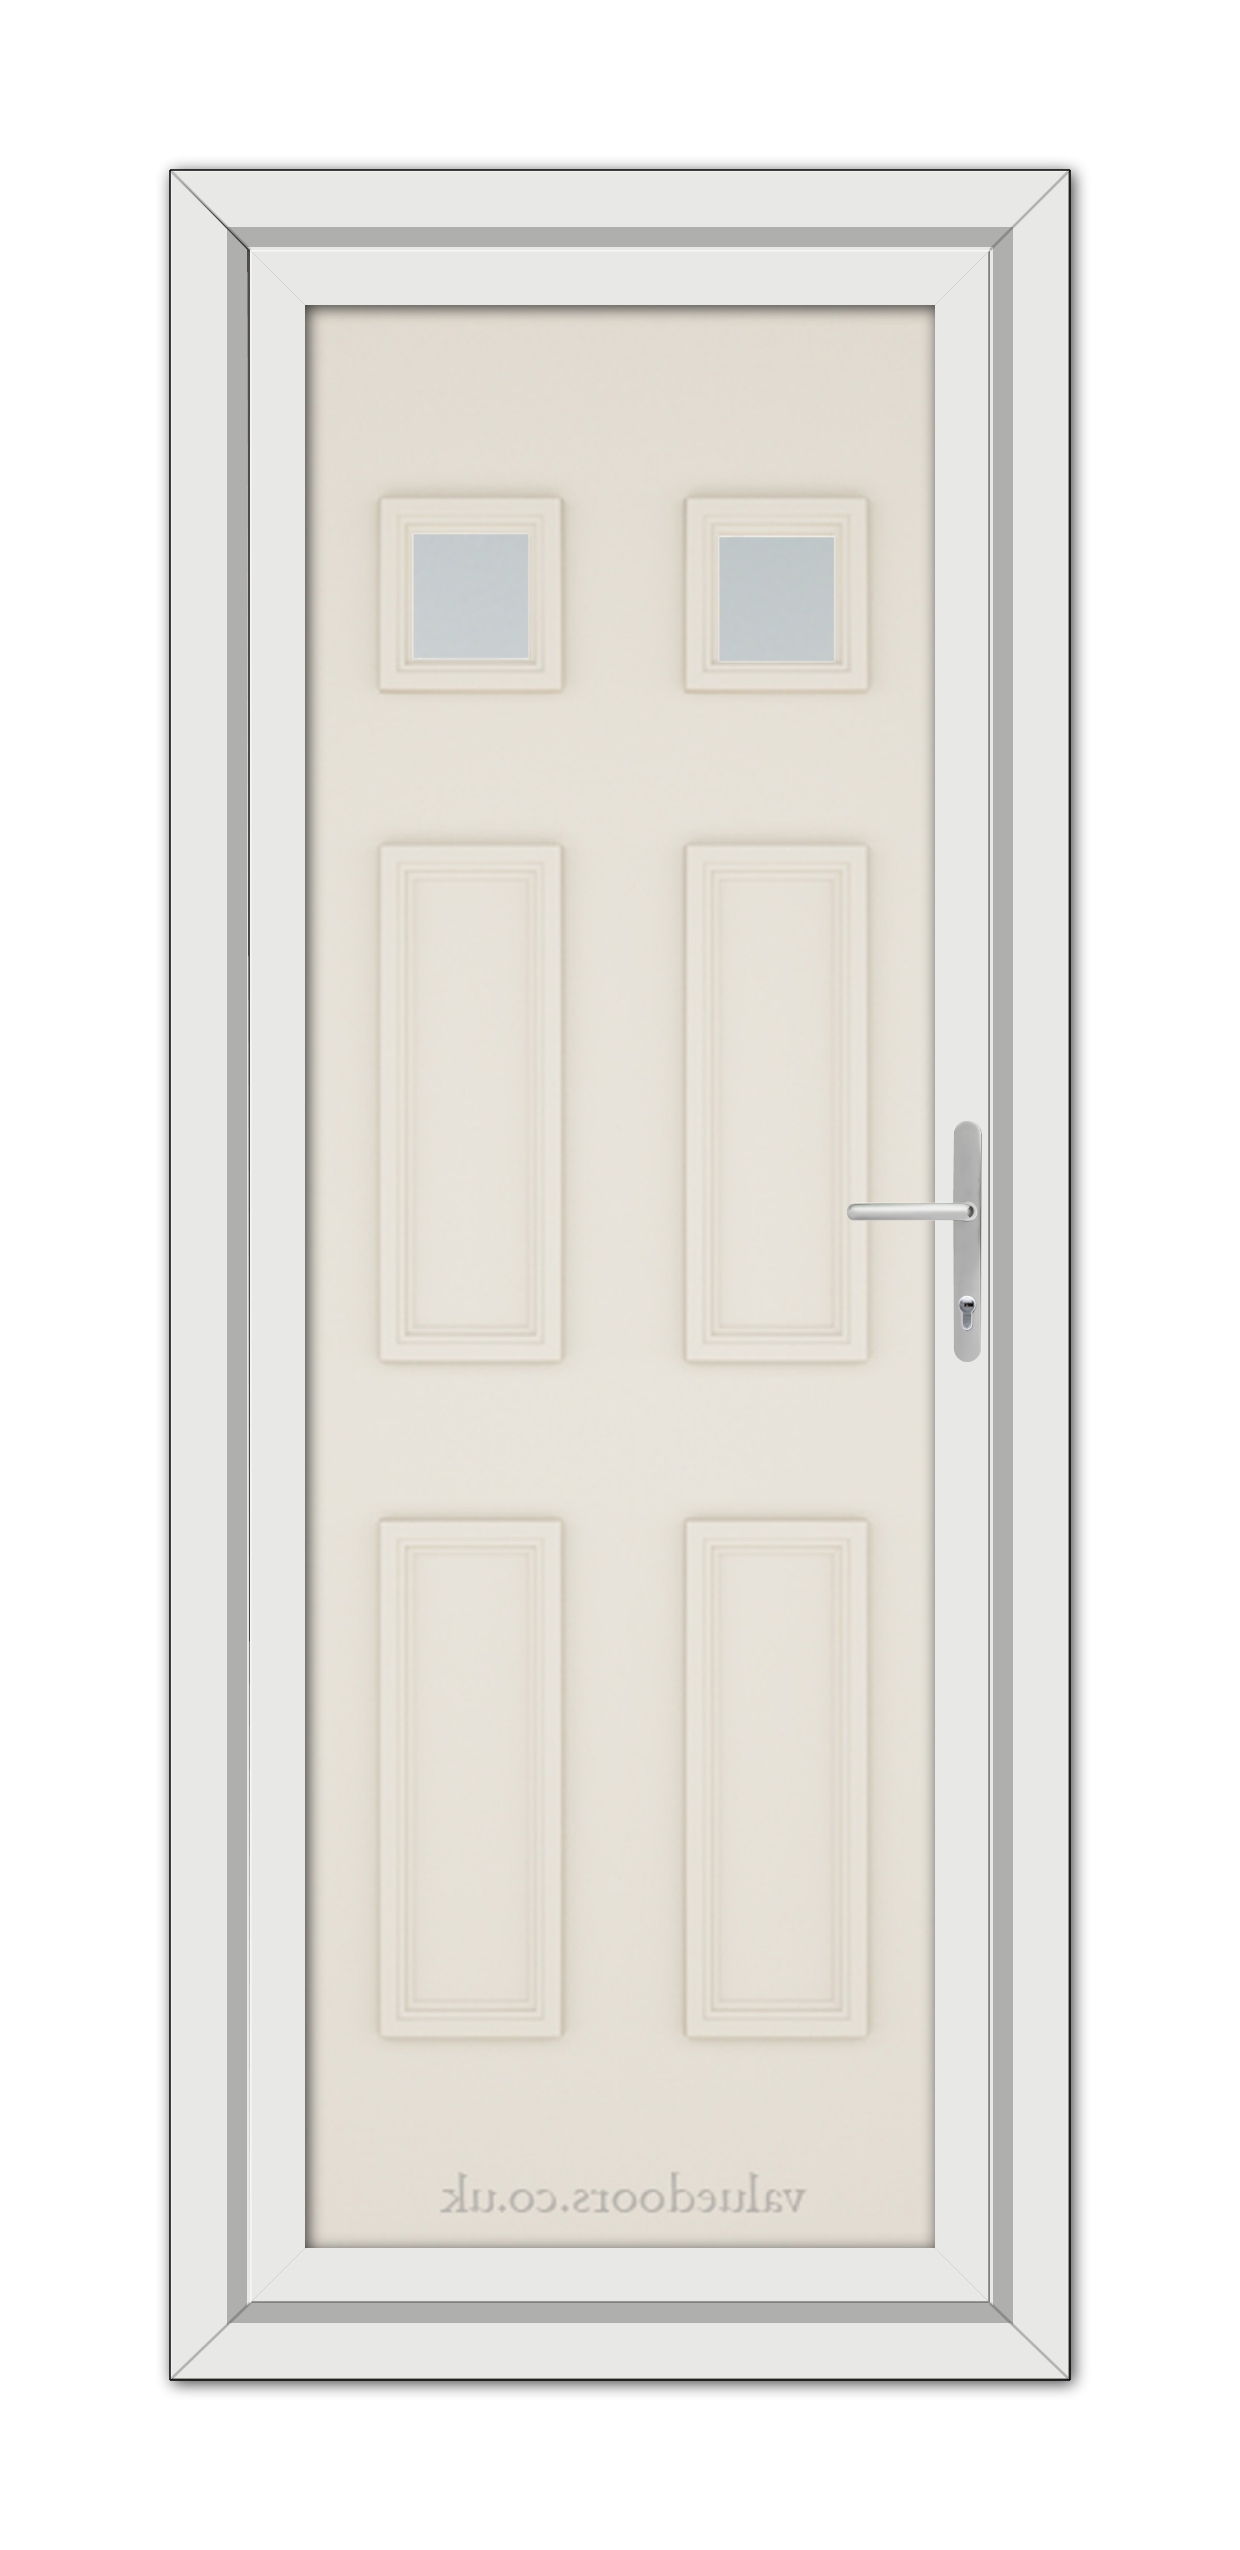 A Cream Windsor uPVC Door with a vertical handle and three small, square windows at the top, set within a gray frame.